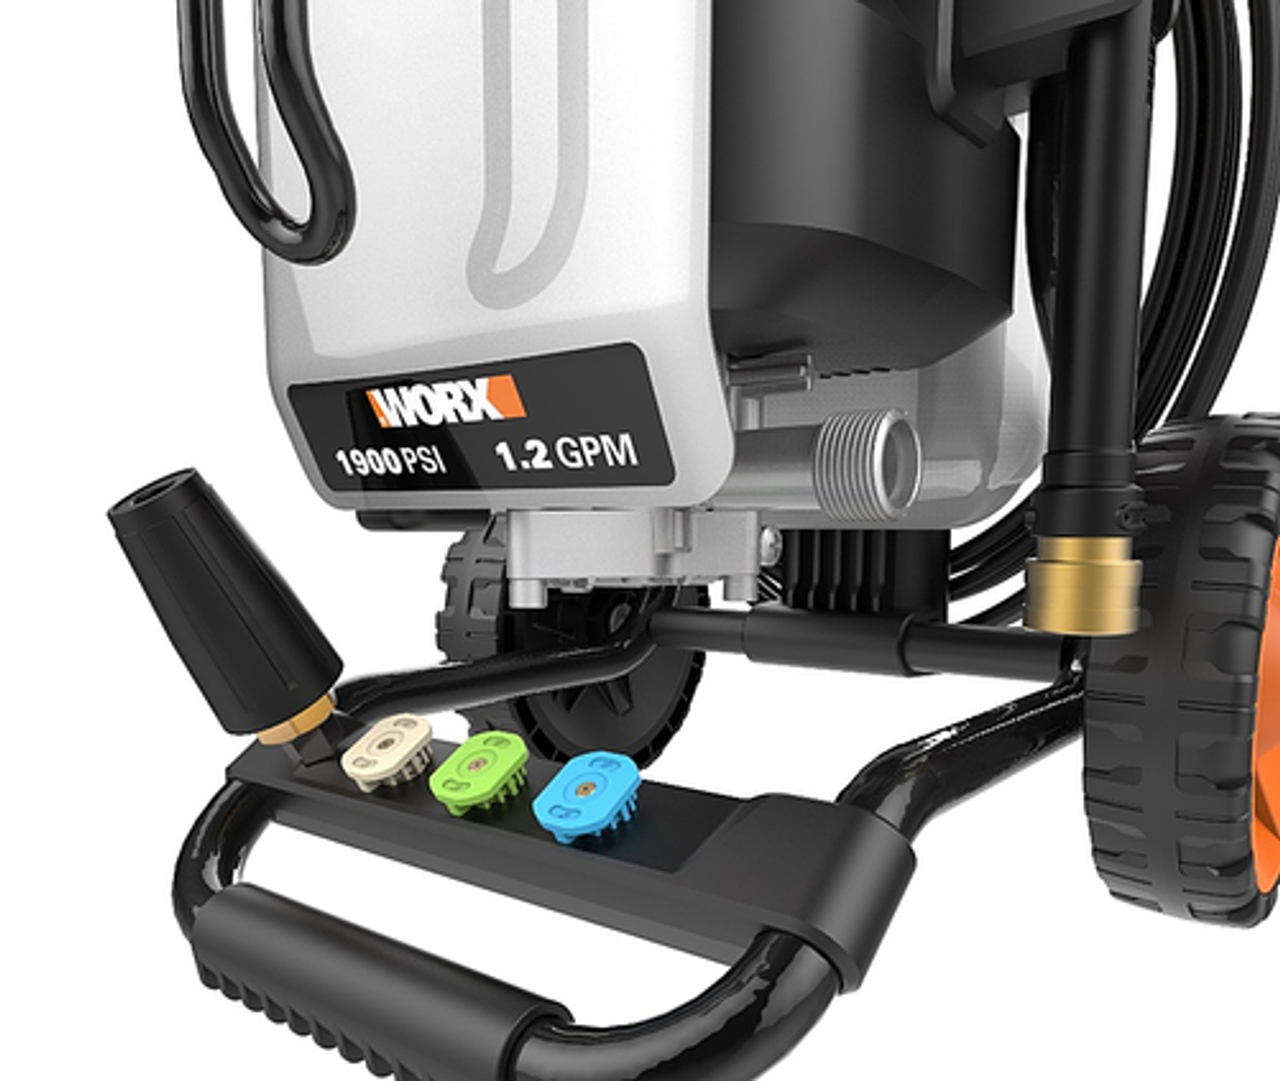 WORX - WG606 Electric Pressure Washer up to 1900 PSI - Black